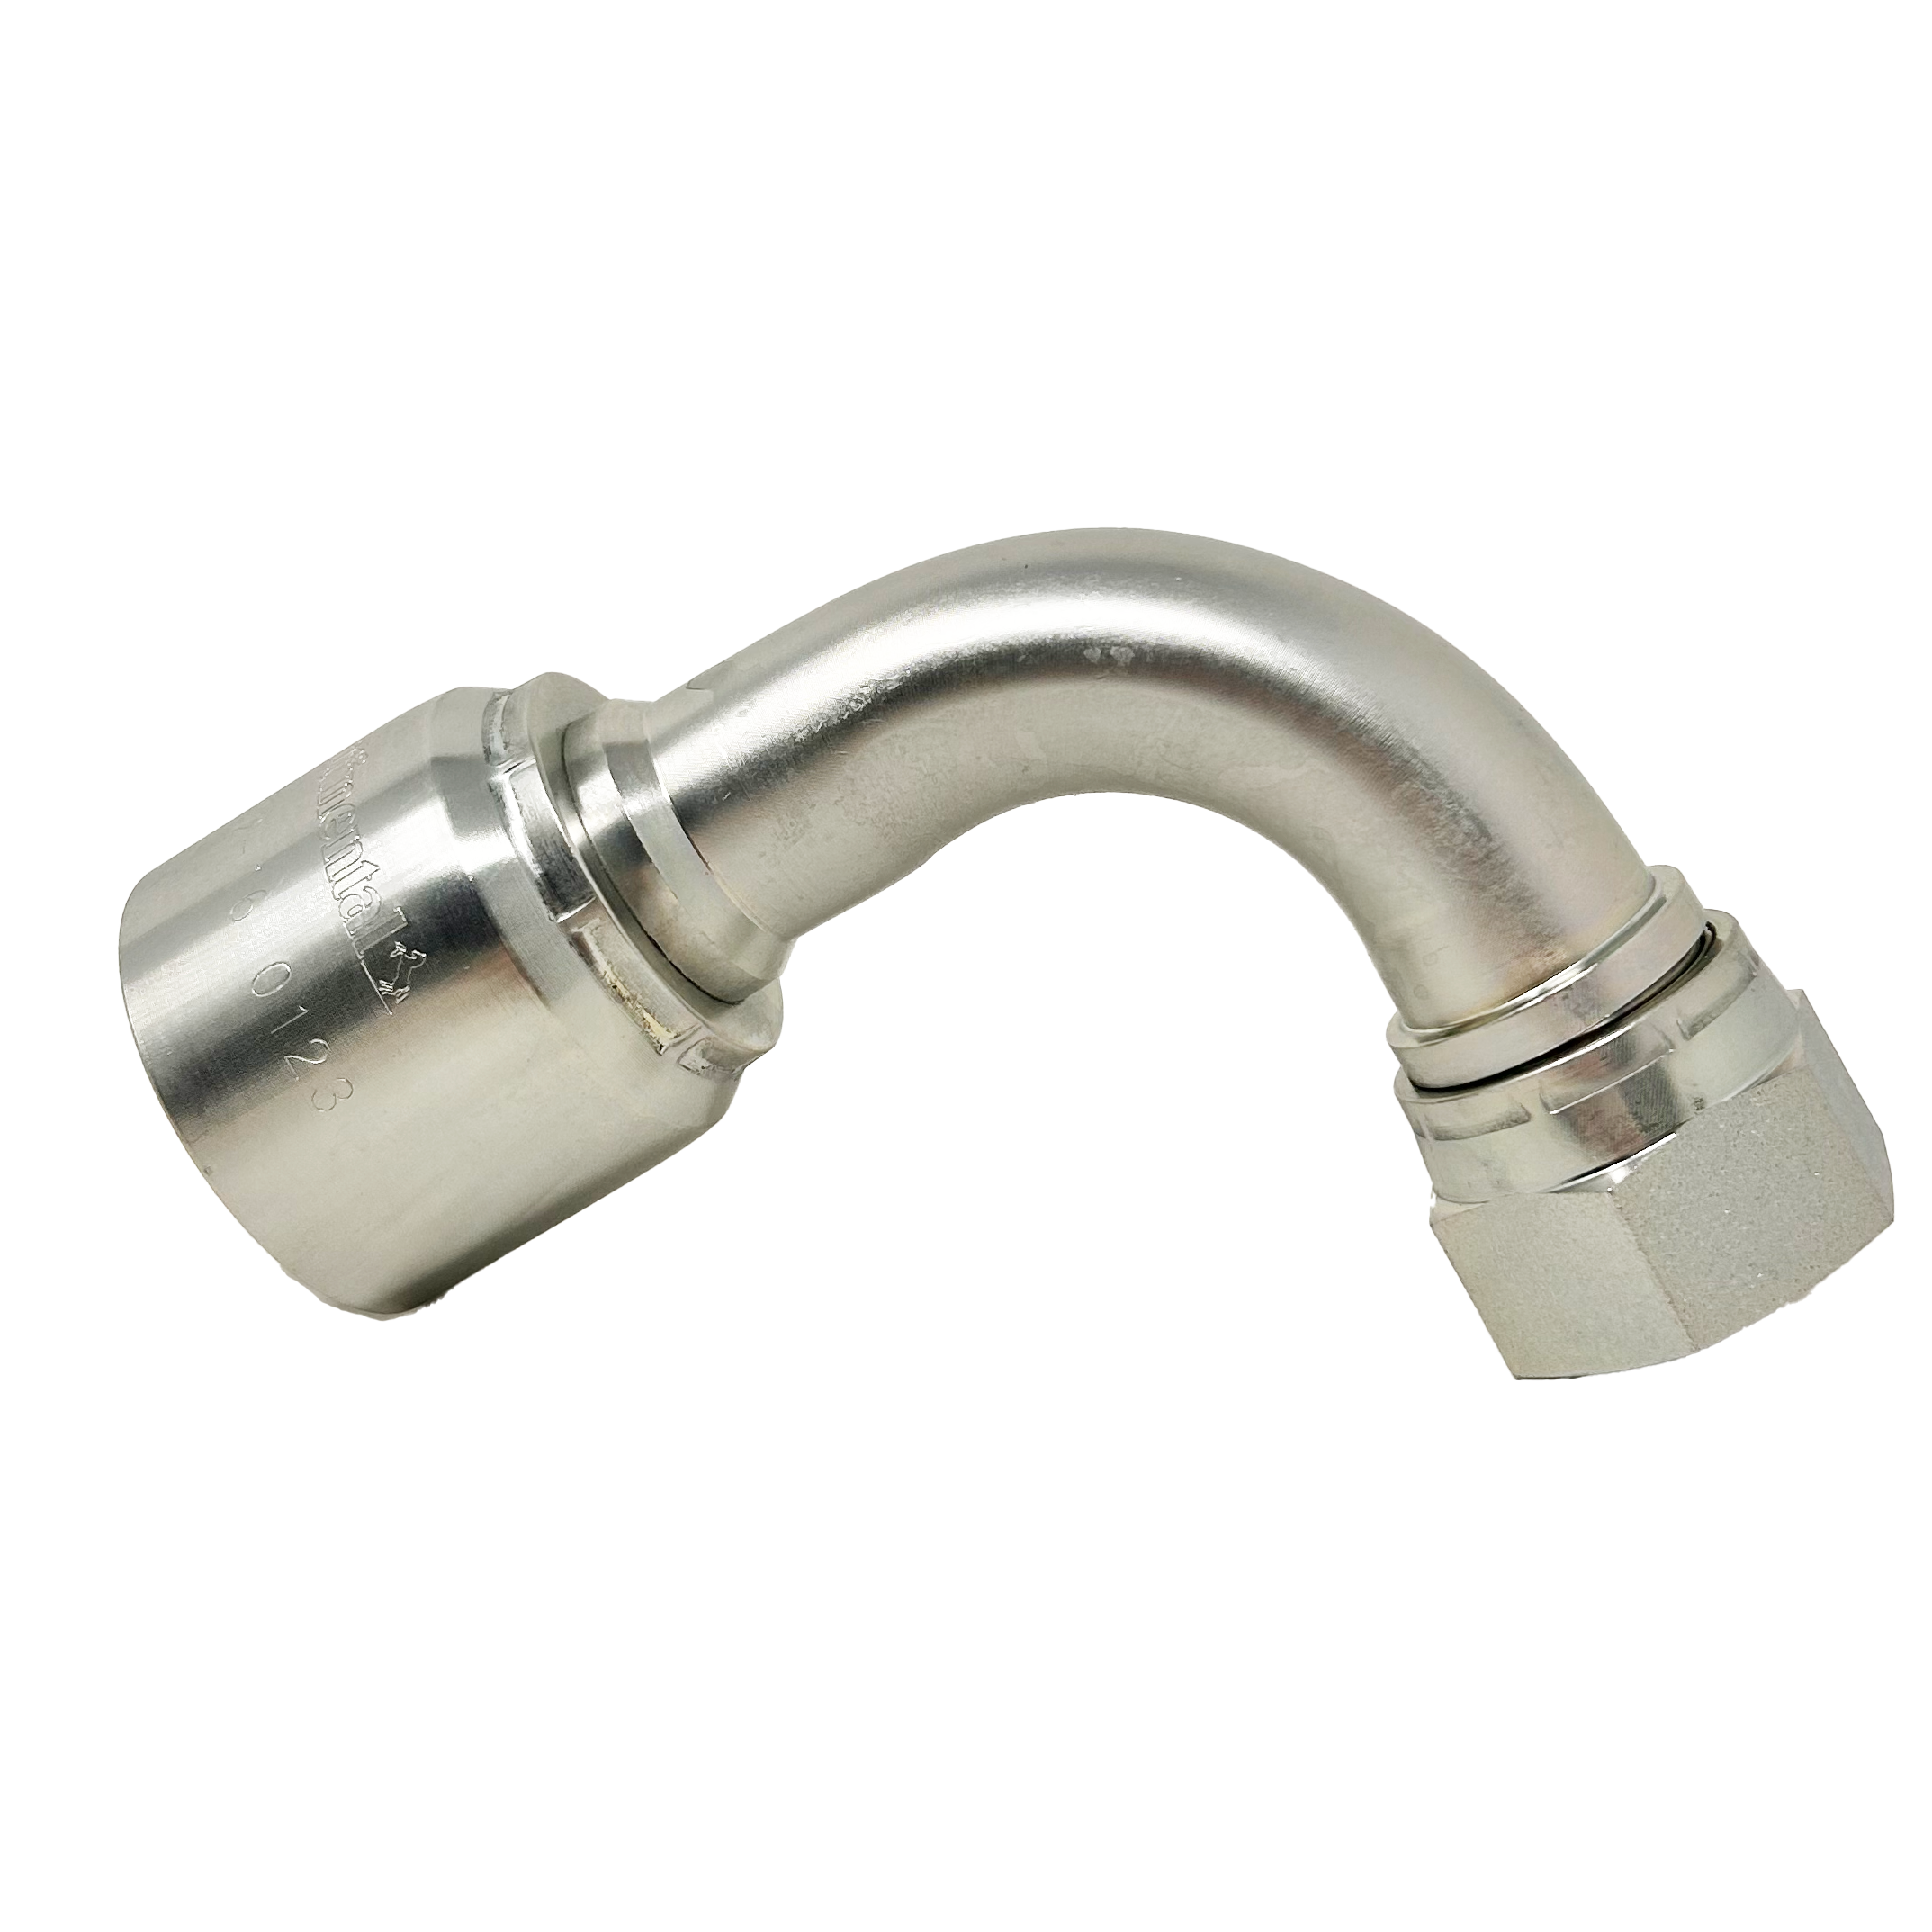 B2-JCFX90-0808S: Continental Hose Fitting, 0.5 (1/2") Hose ID x 3/4-16 Female JIC, 90-Degree Swivel Connection